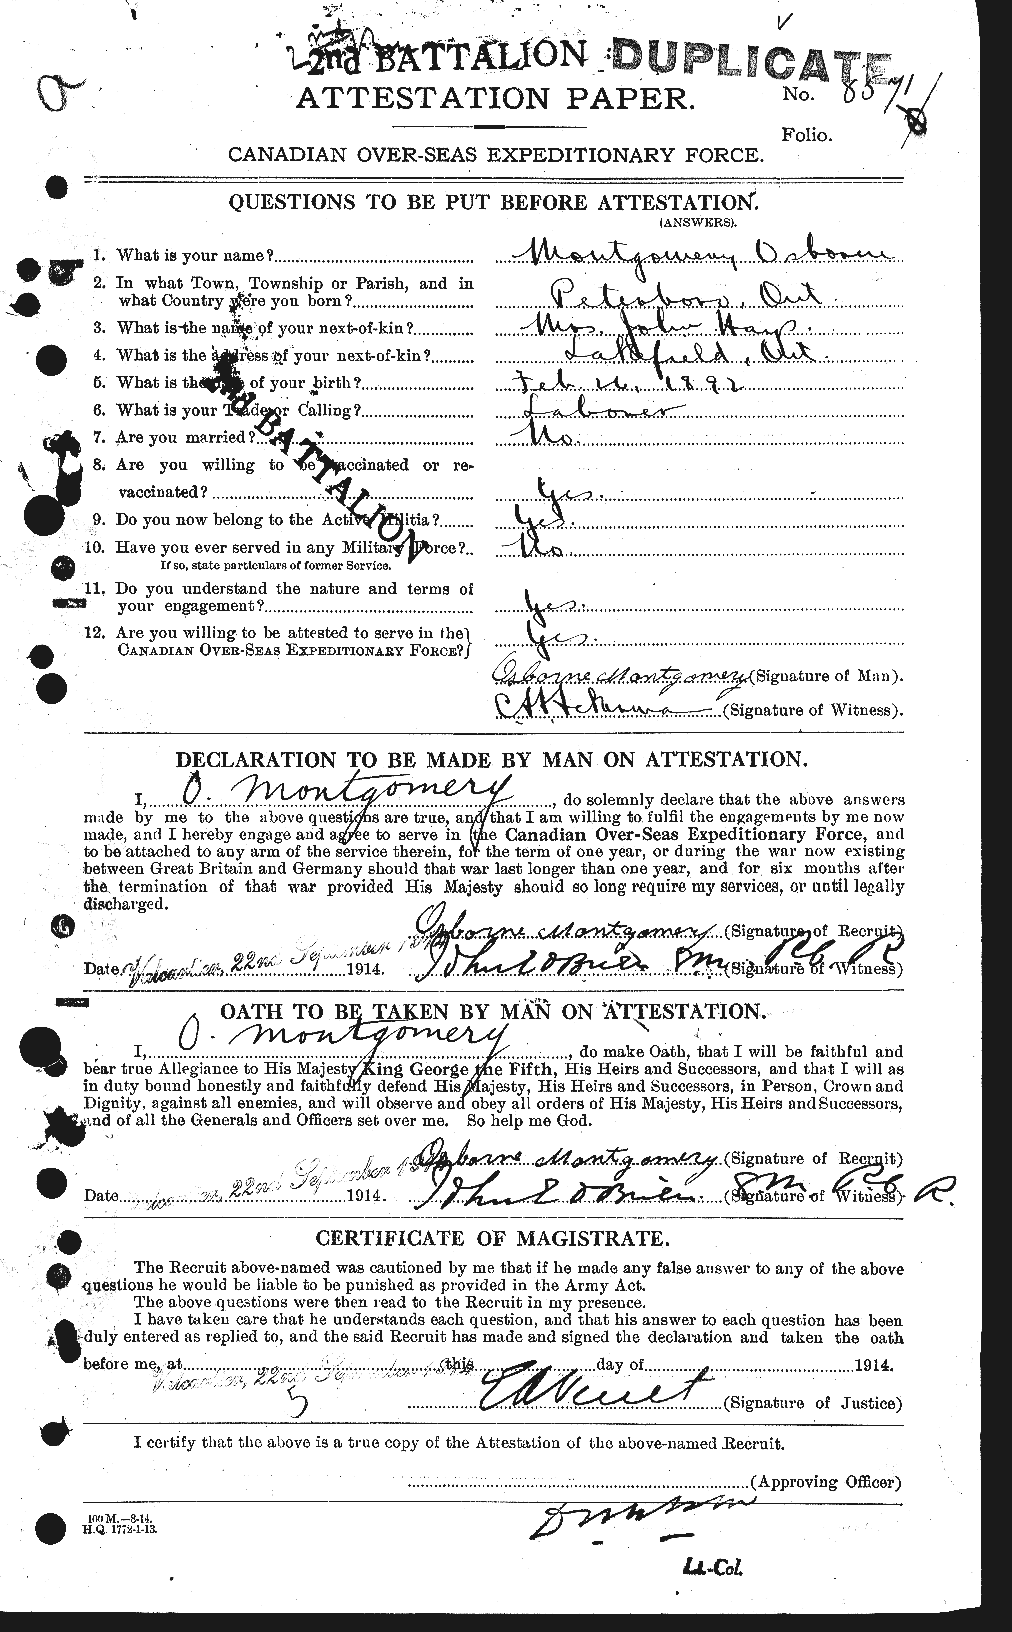 Personnel Records of the First World War - CEF 504534a